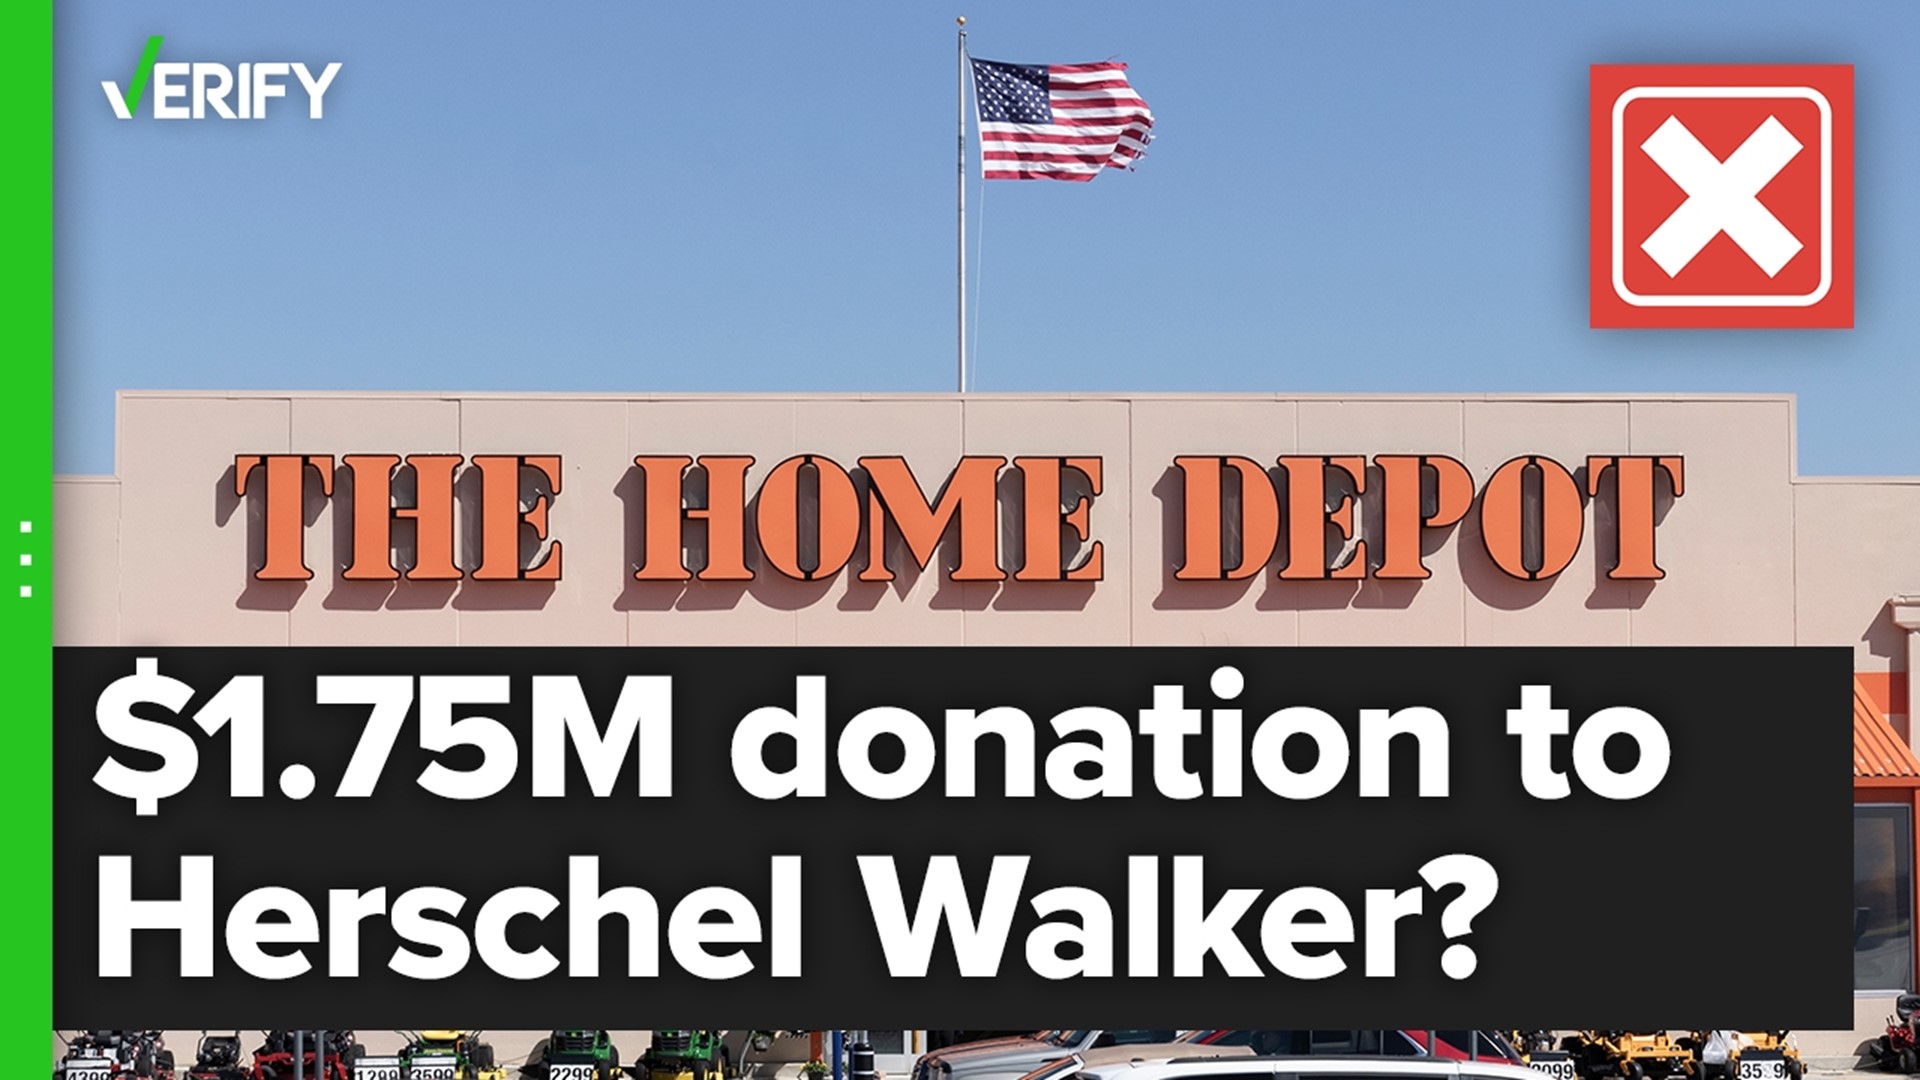 FEC filings show Home Depot co-founder Bernie Marcus, who left the company more than 20 years ago, donated to the Herschel Walker campaign, not the company directly.